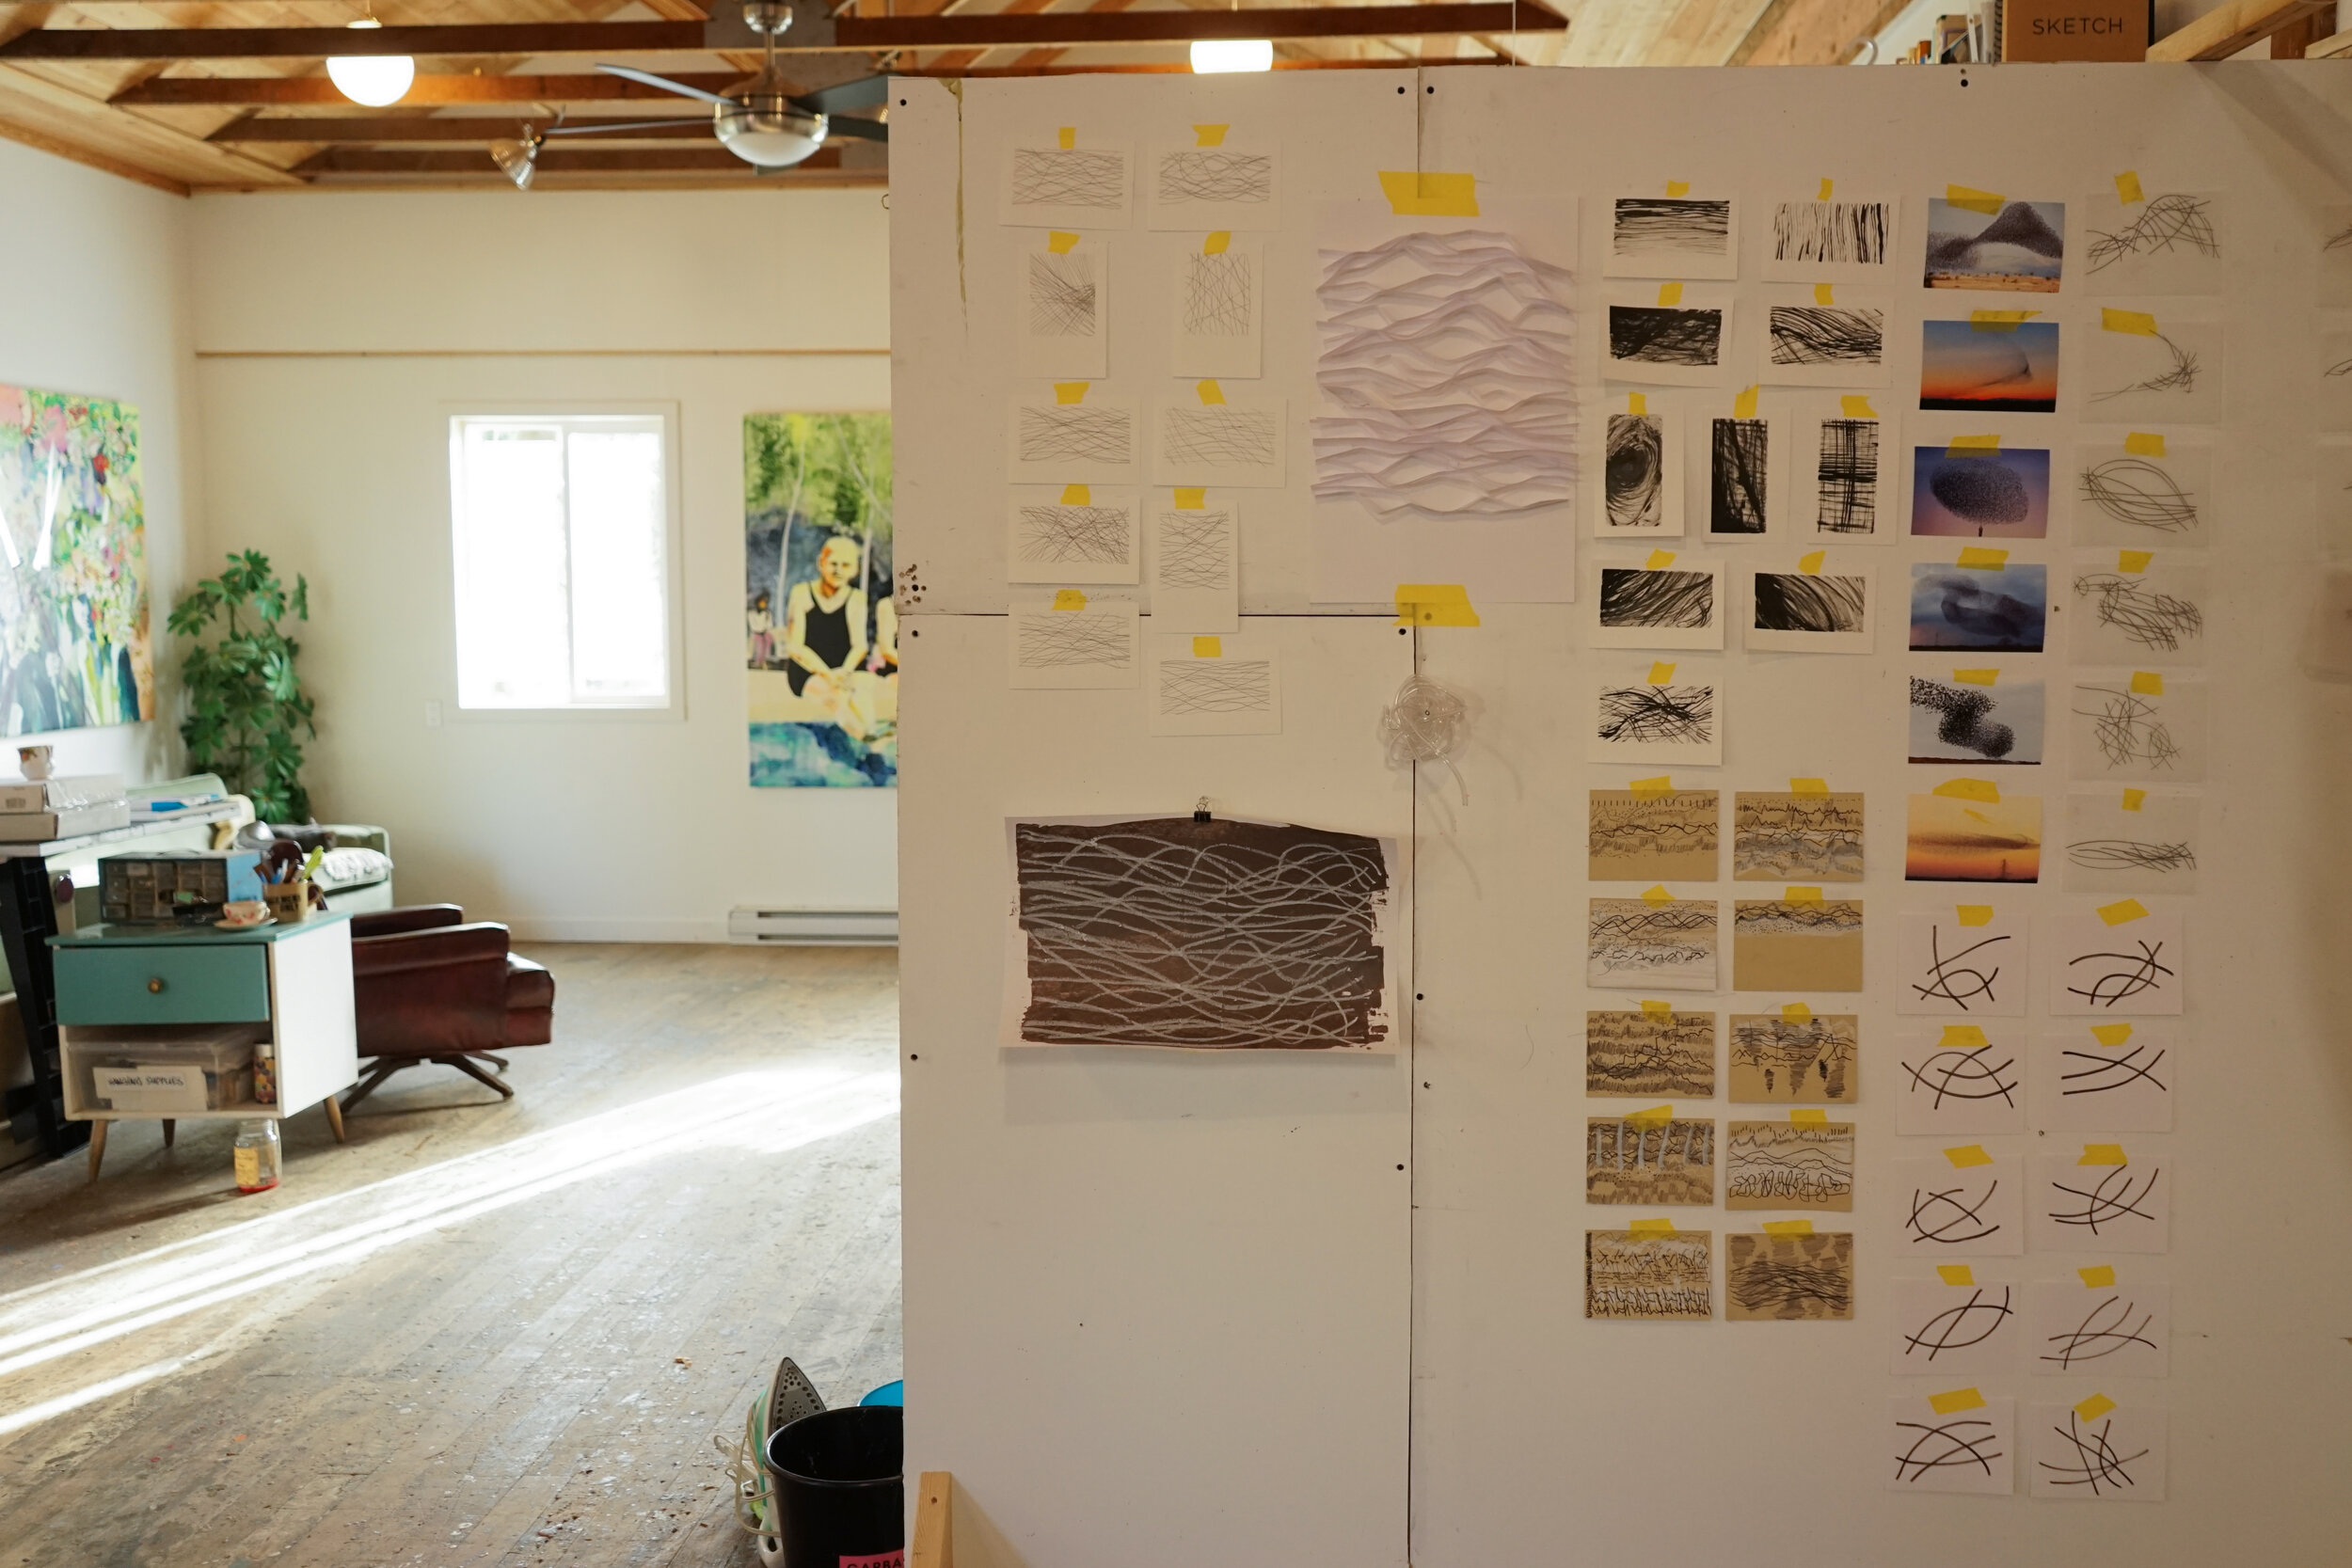  Robustness to Uncertainty | exploring ideas at Ou Gallery residency | studio views 